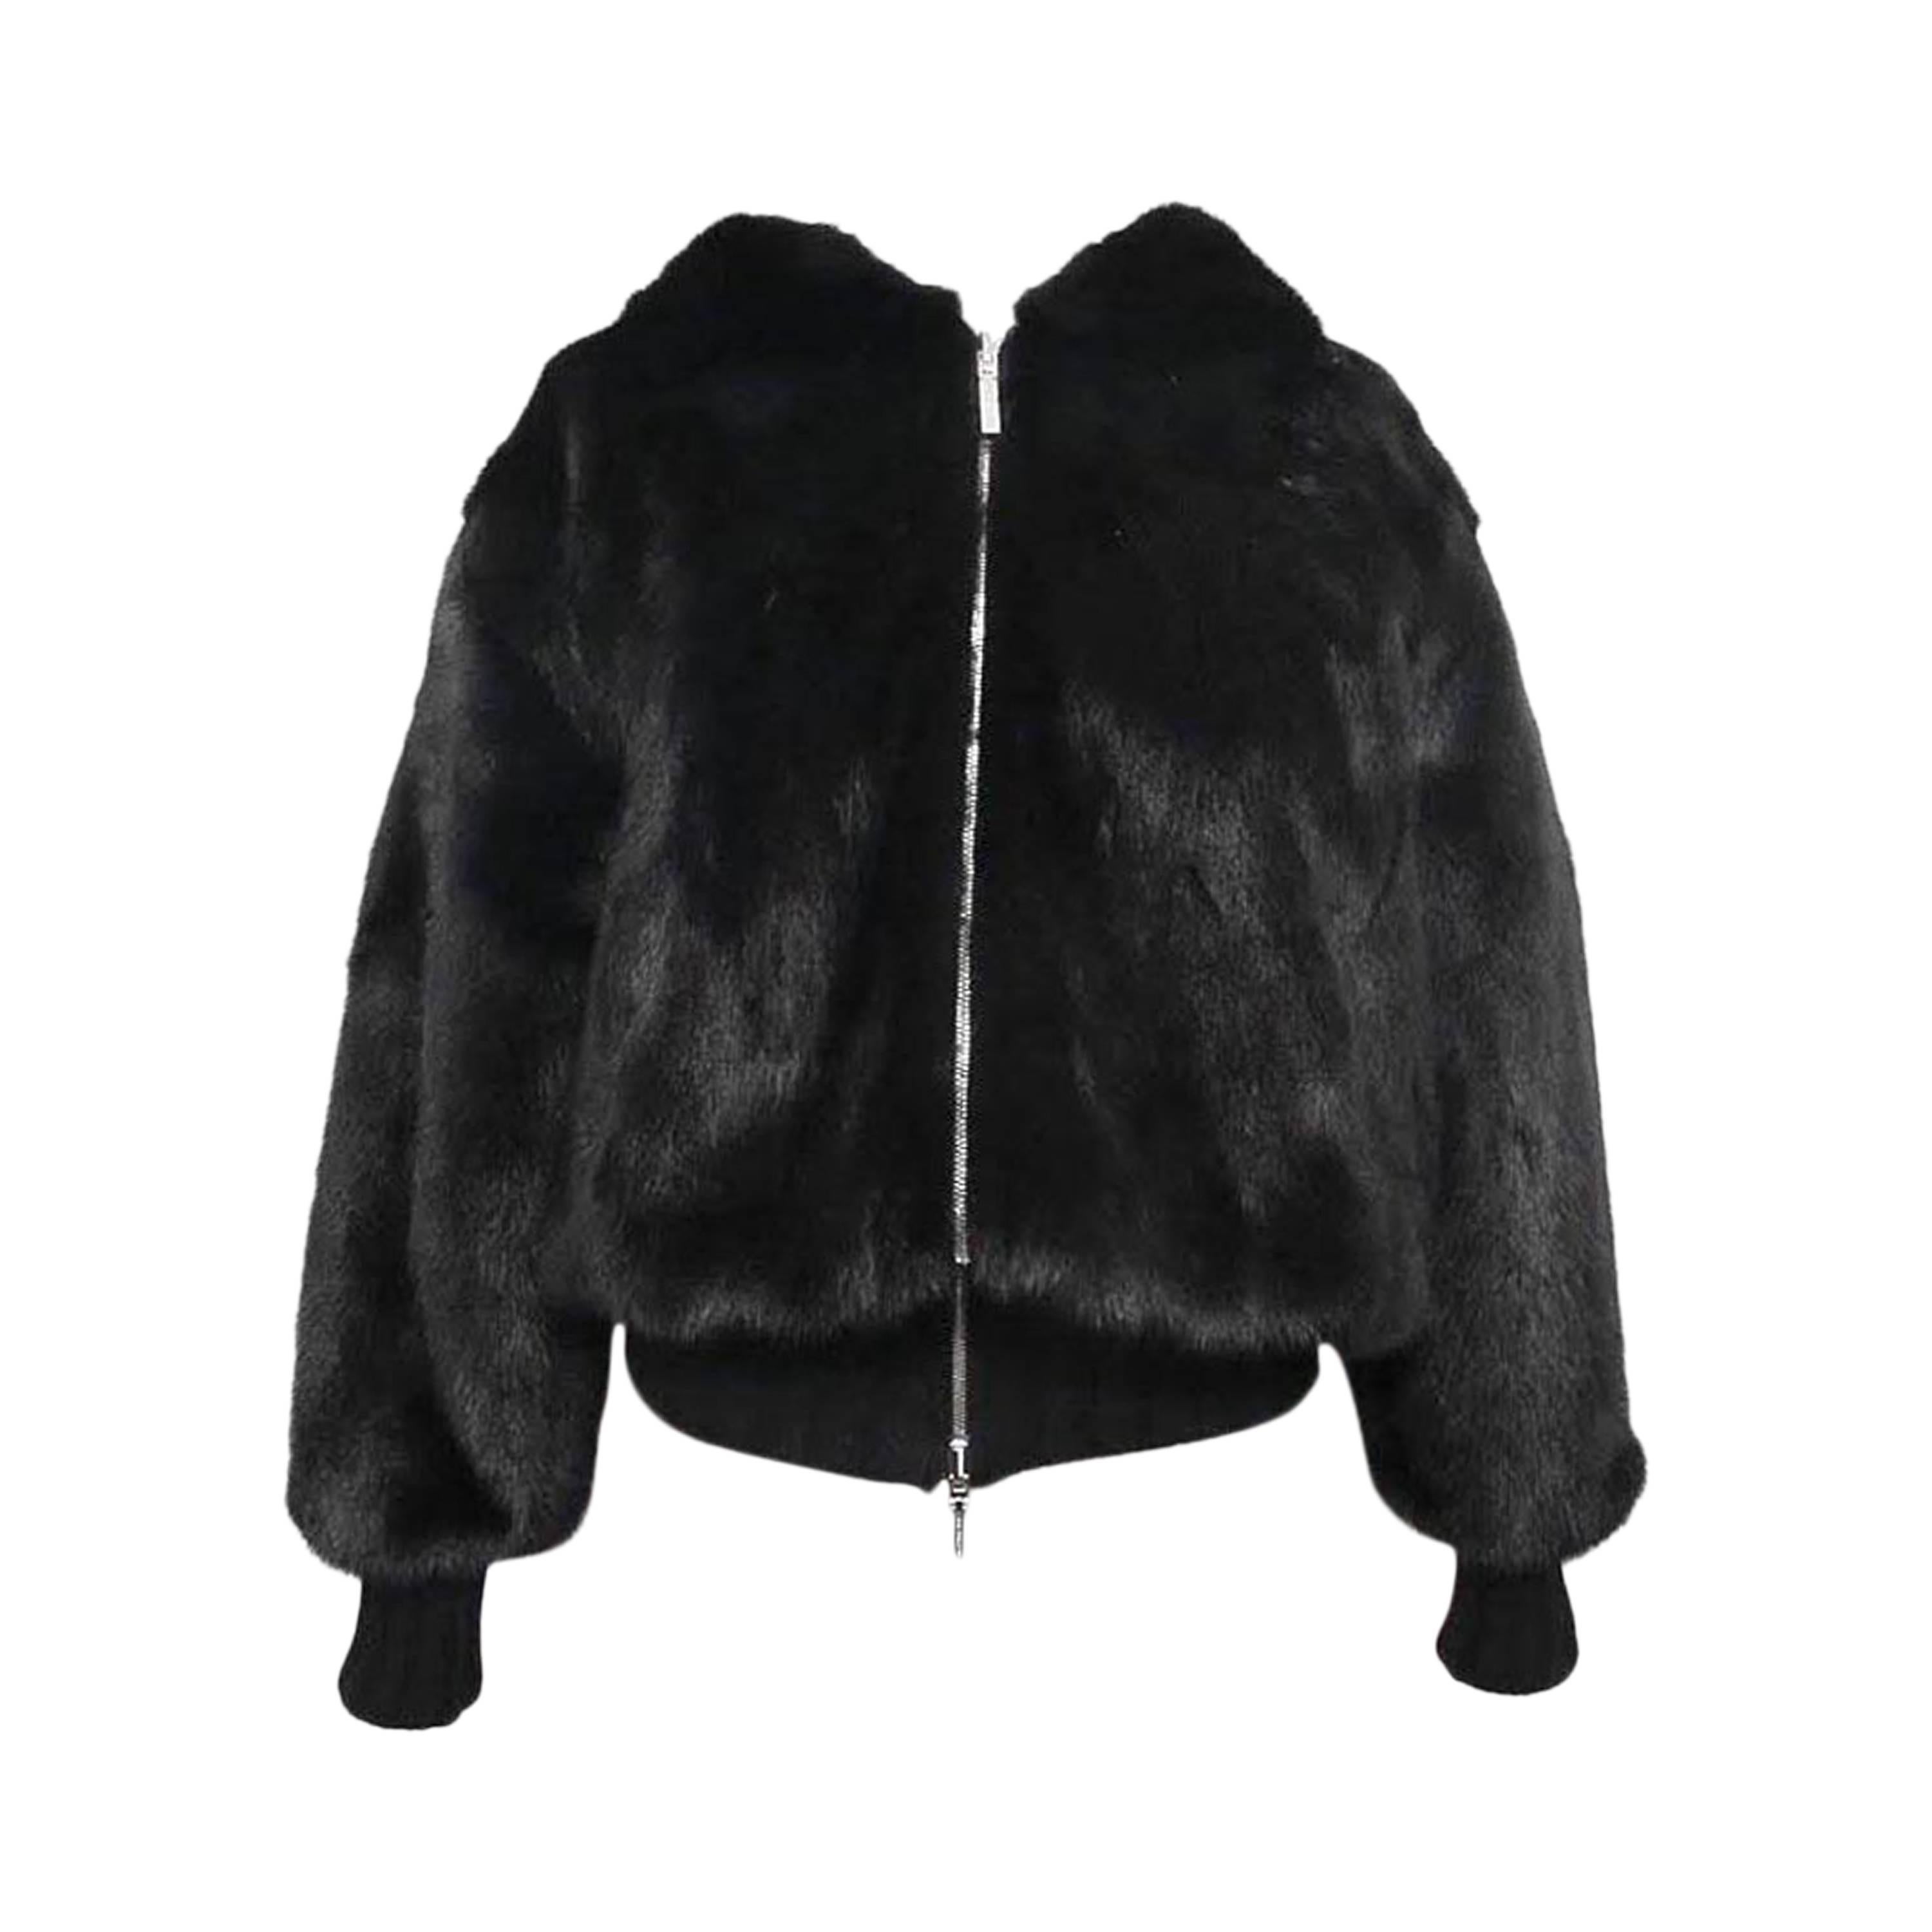 New Gianni Versace Double Blouson Mink Jacket with Hood For Sale